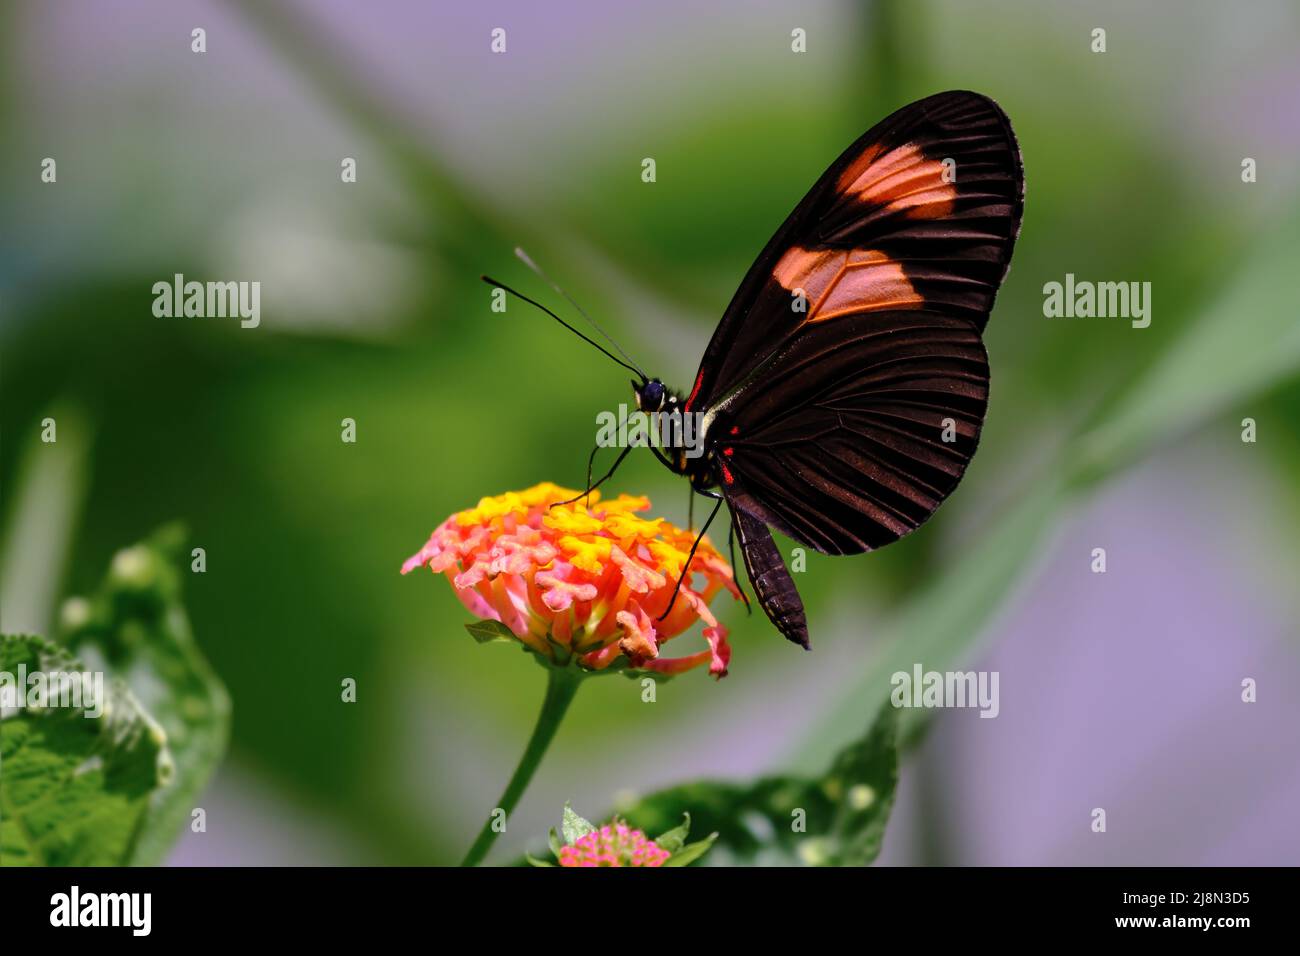 Beautiful butterfly (Heliconius melpomene) perched on a flower and its extended proboscis sipping nectar. Stock Photo